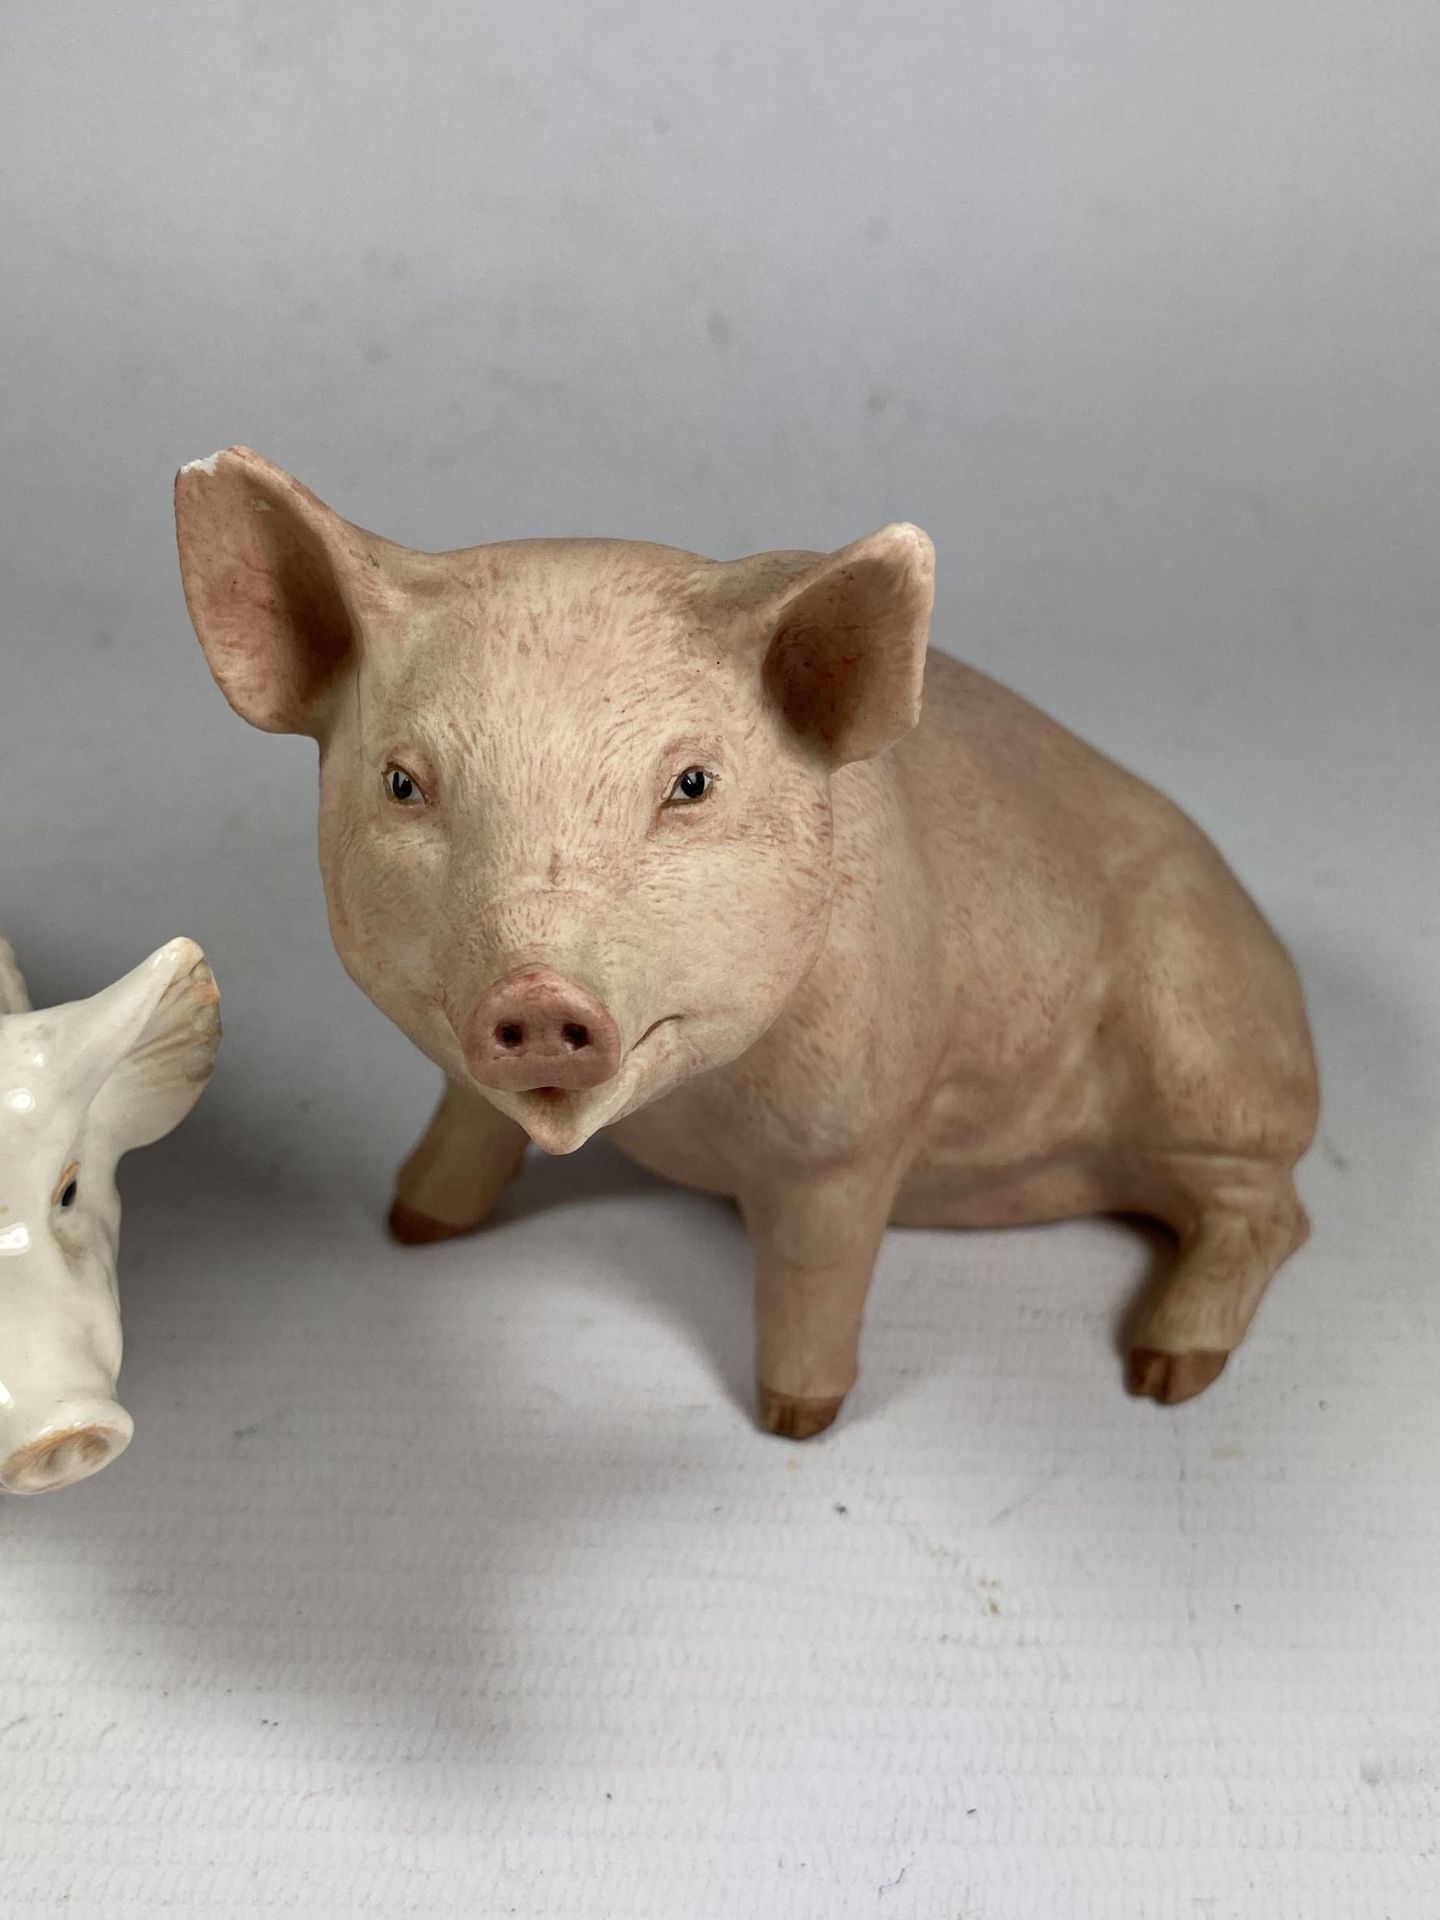 TWO CERAMIC PIGS - A BESWICK CH WALL CHAMPION BOY 53 AND AN AYNSLEY 'PIGGY' (CHIP TO EAR) - Image 2 of 4